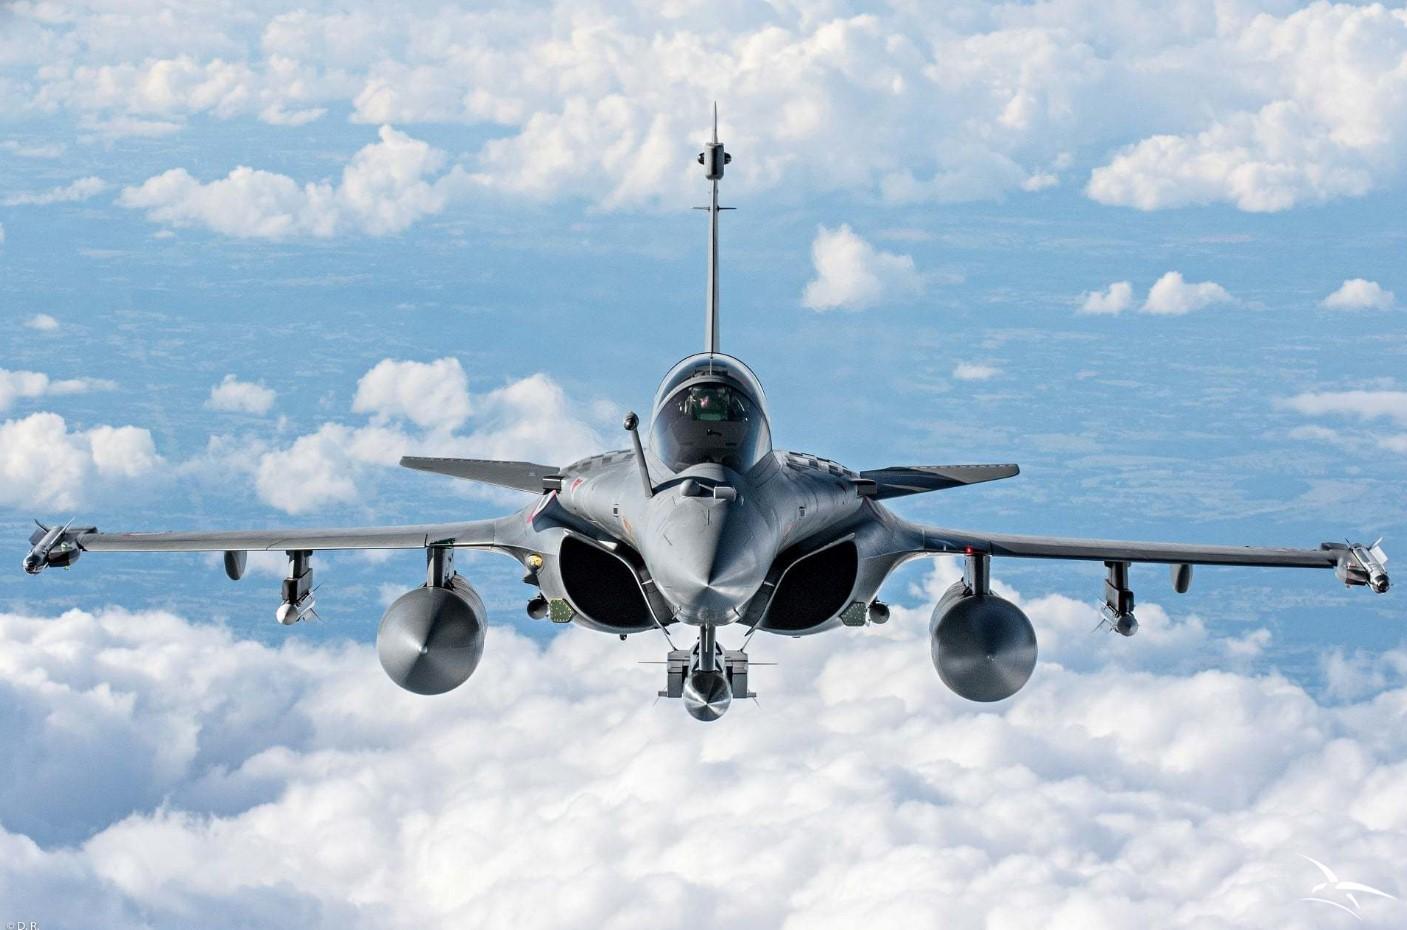 Indian Rafale to participate in French Military exercise with NATO allies_40.1